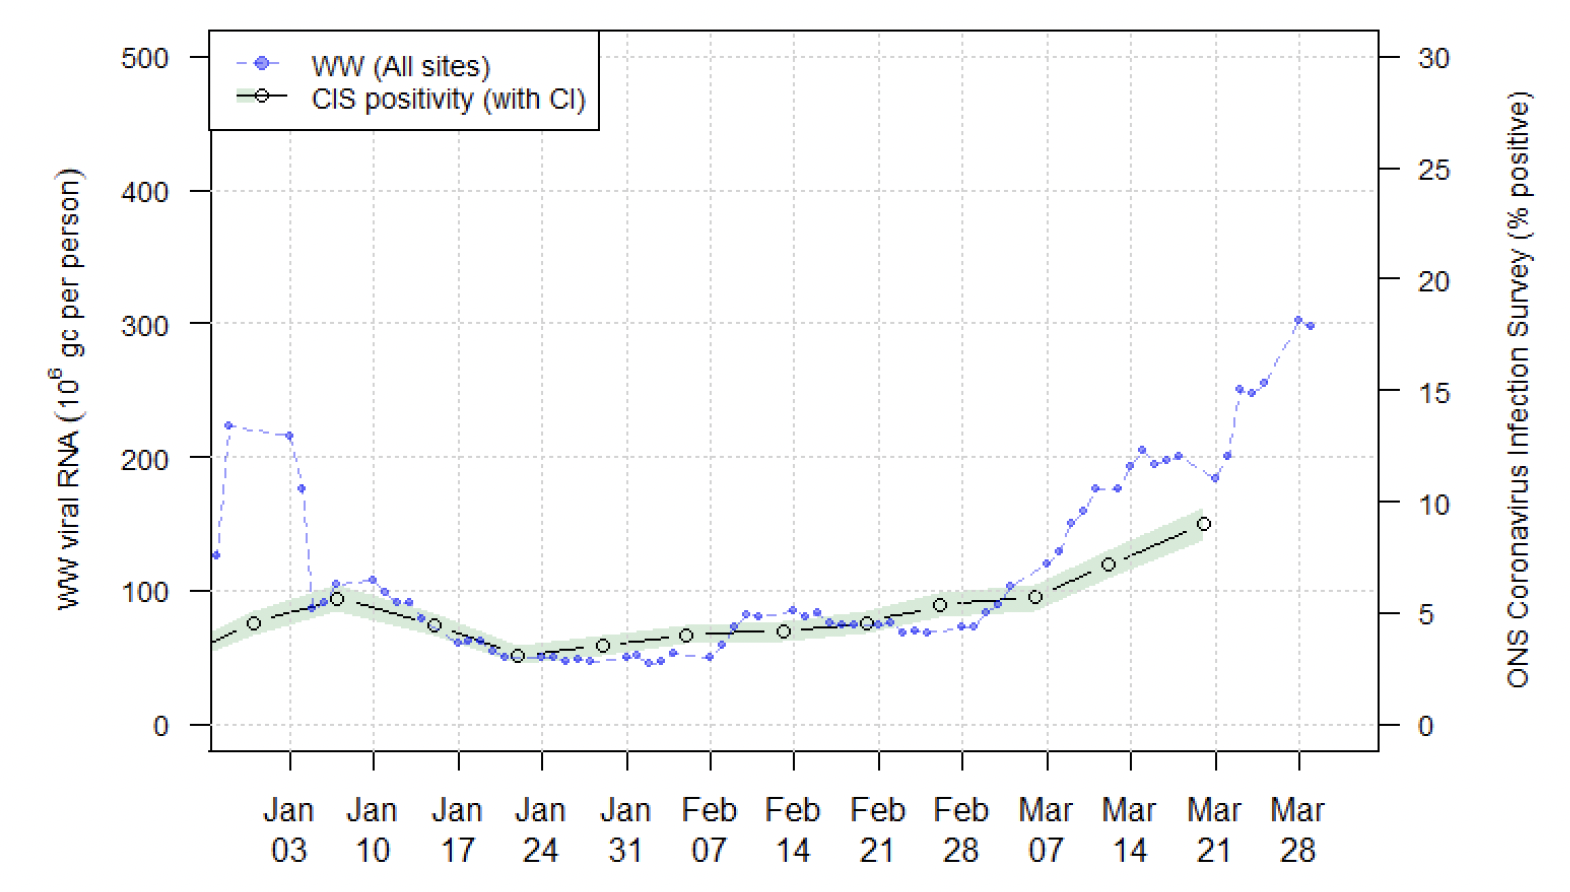 a line chart showing the national running average trends in wastewater Covid-19 from the end of December 2021 to March 2022, and CIS positivity estimates from the end of December 2021 to March 2022. After a steep decrease in early January, Covid-19 wastewater levels appear to fluctuate throughout January and February, with a sharp rise in early March. This has been mostly in line with the CIS positivity estimate since mid-January 2022. 